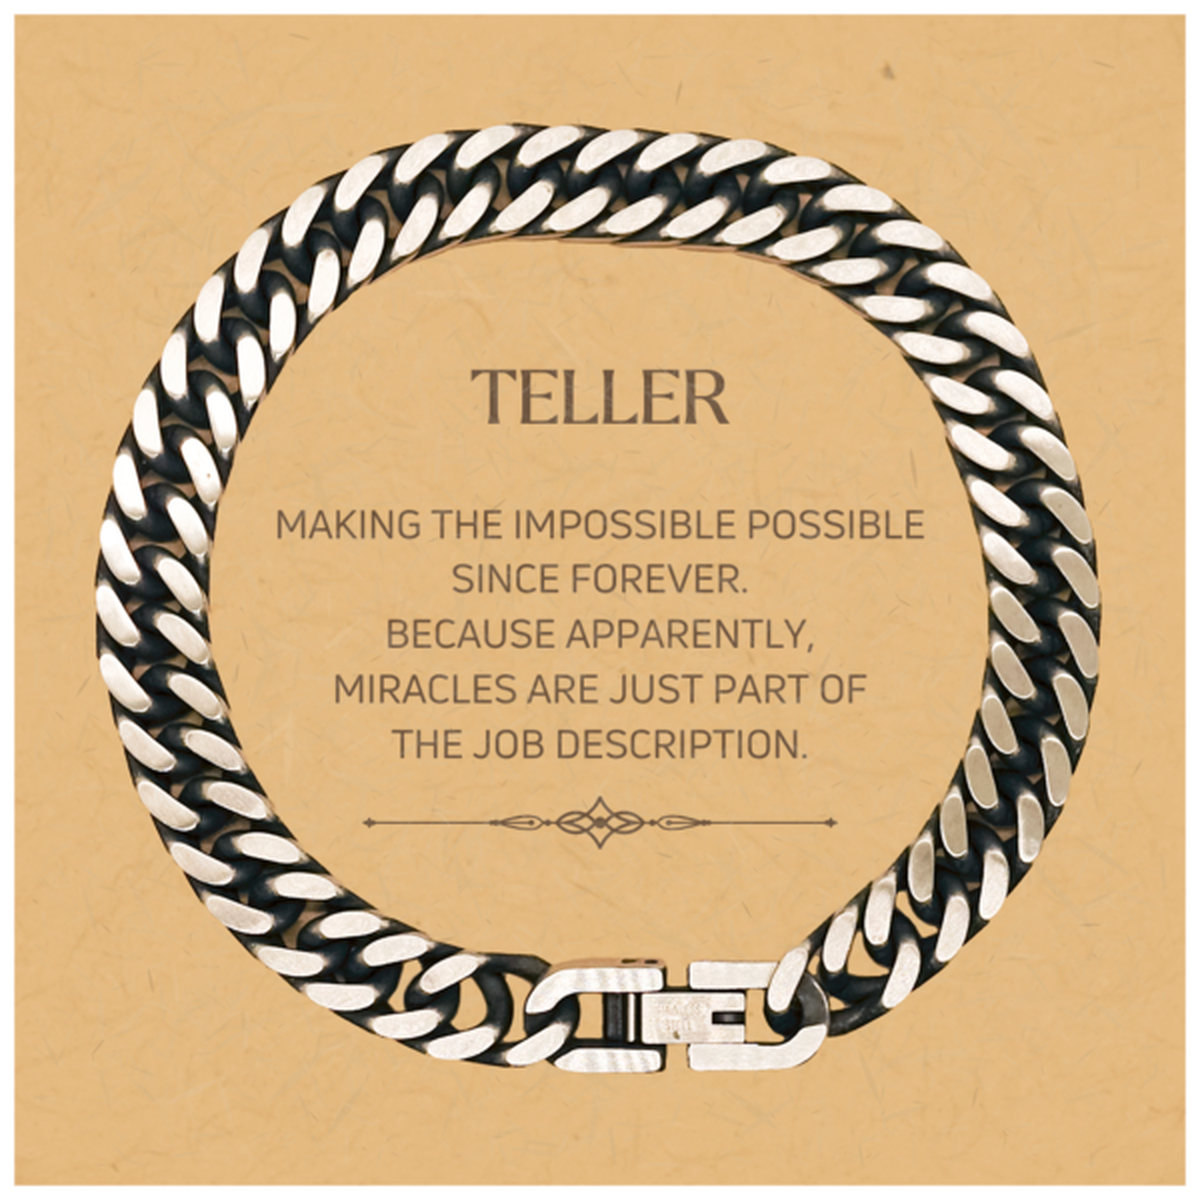 Funny Teller Gifts, Miracles are just part of the job description, Inspirational Birthday Christmas Cuban Link Chain Bracelet For Teller, Men, Women, Coworkers, Friends, Boss